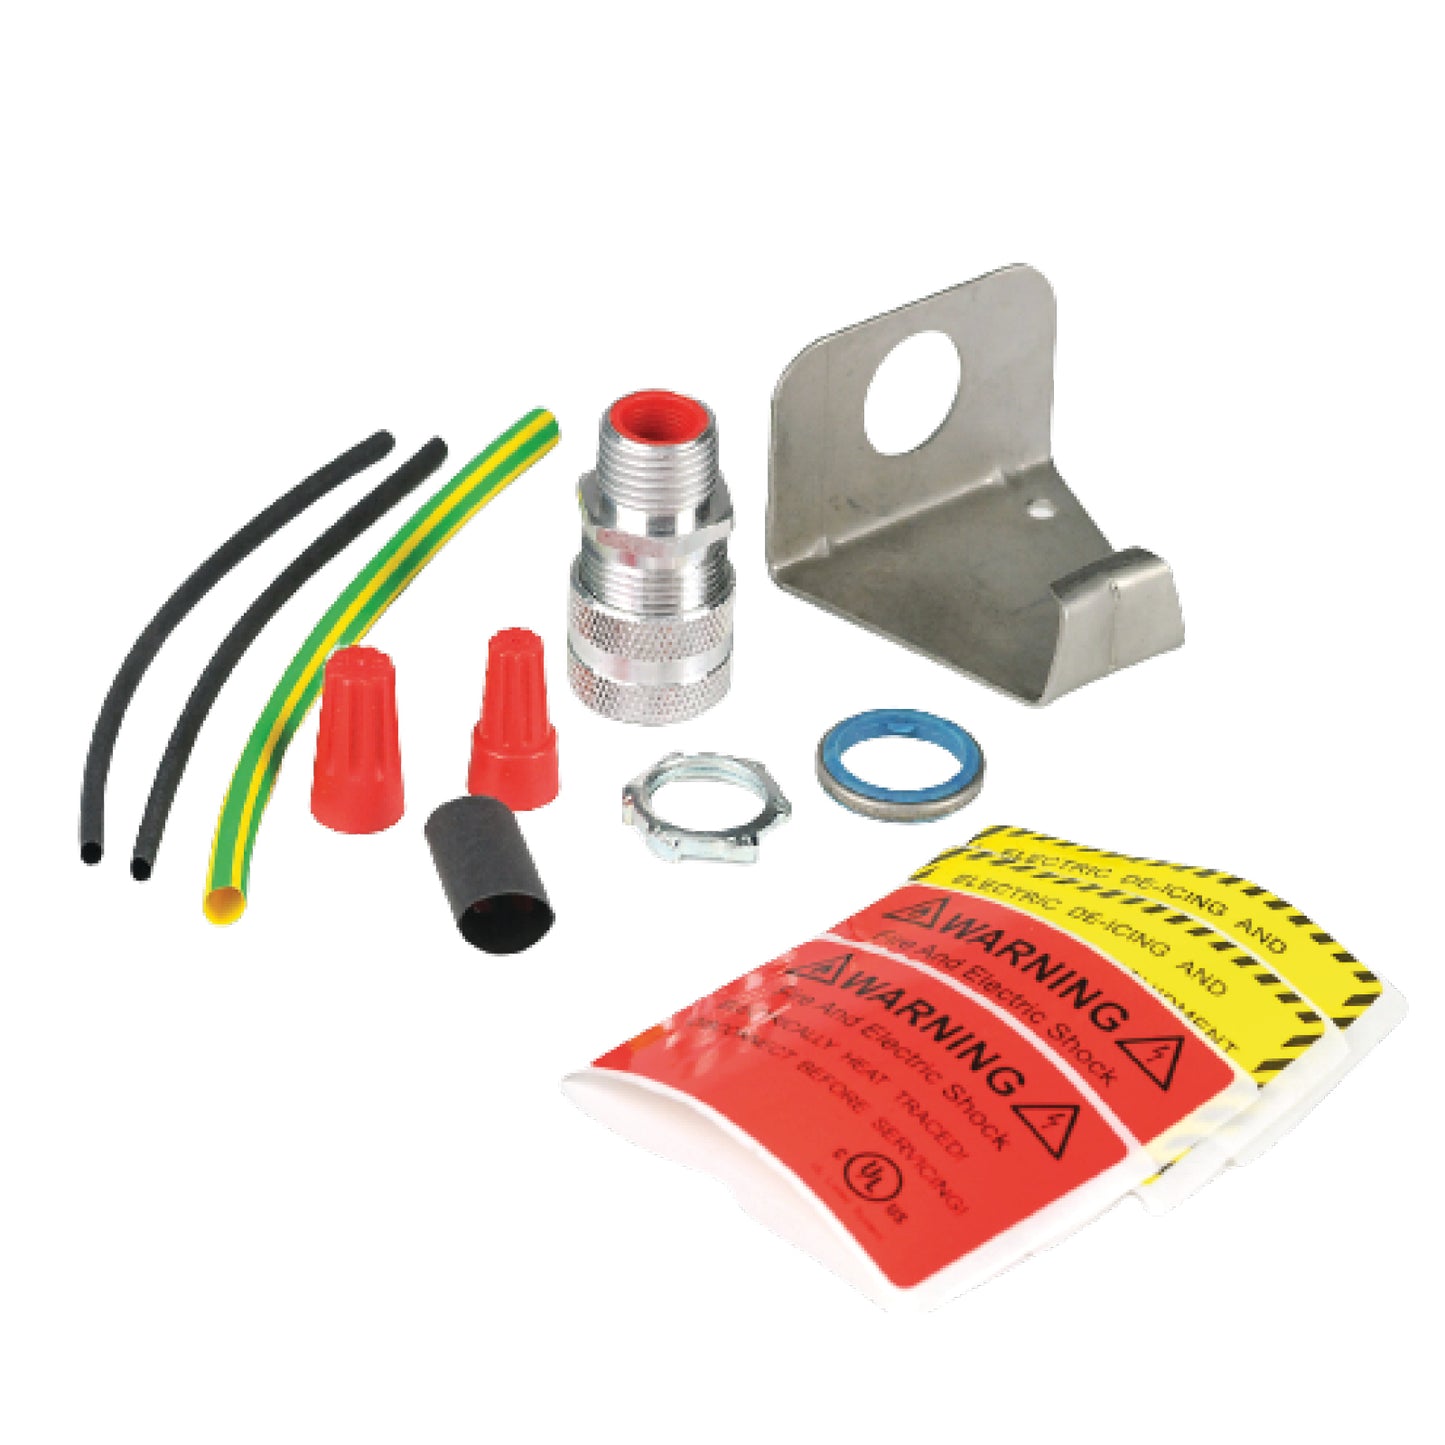 Power connection kit for TLC-TP (HTLe) and MVP (HTR)